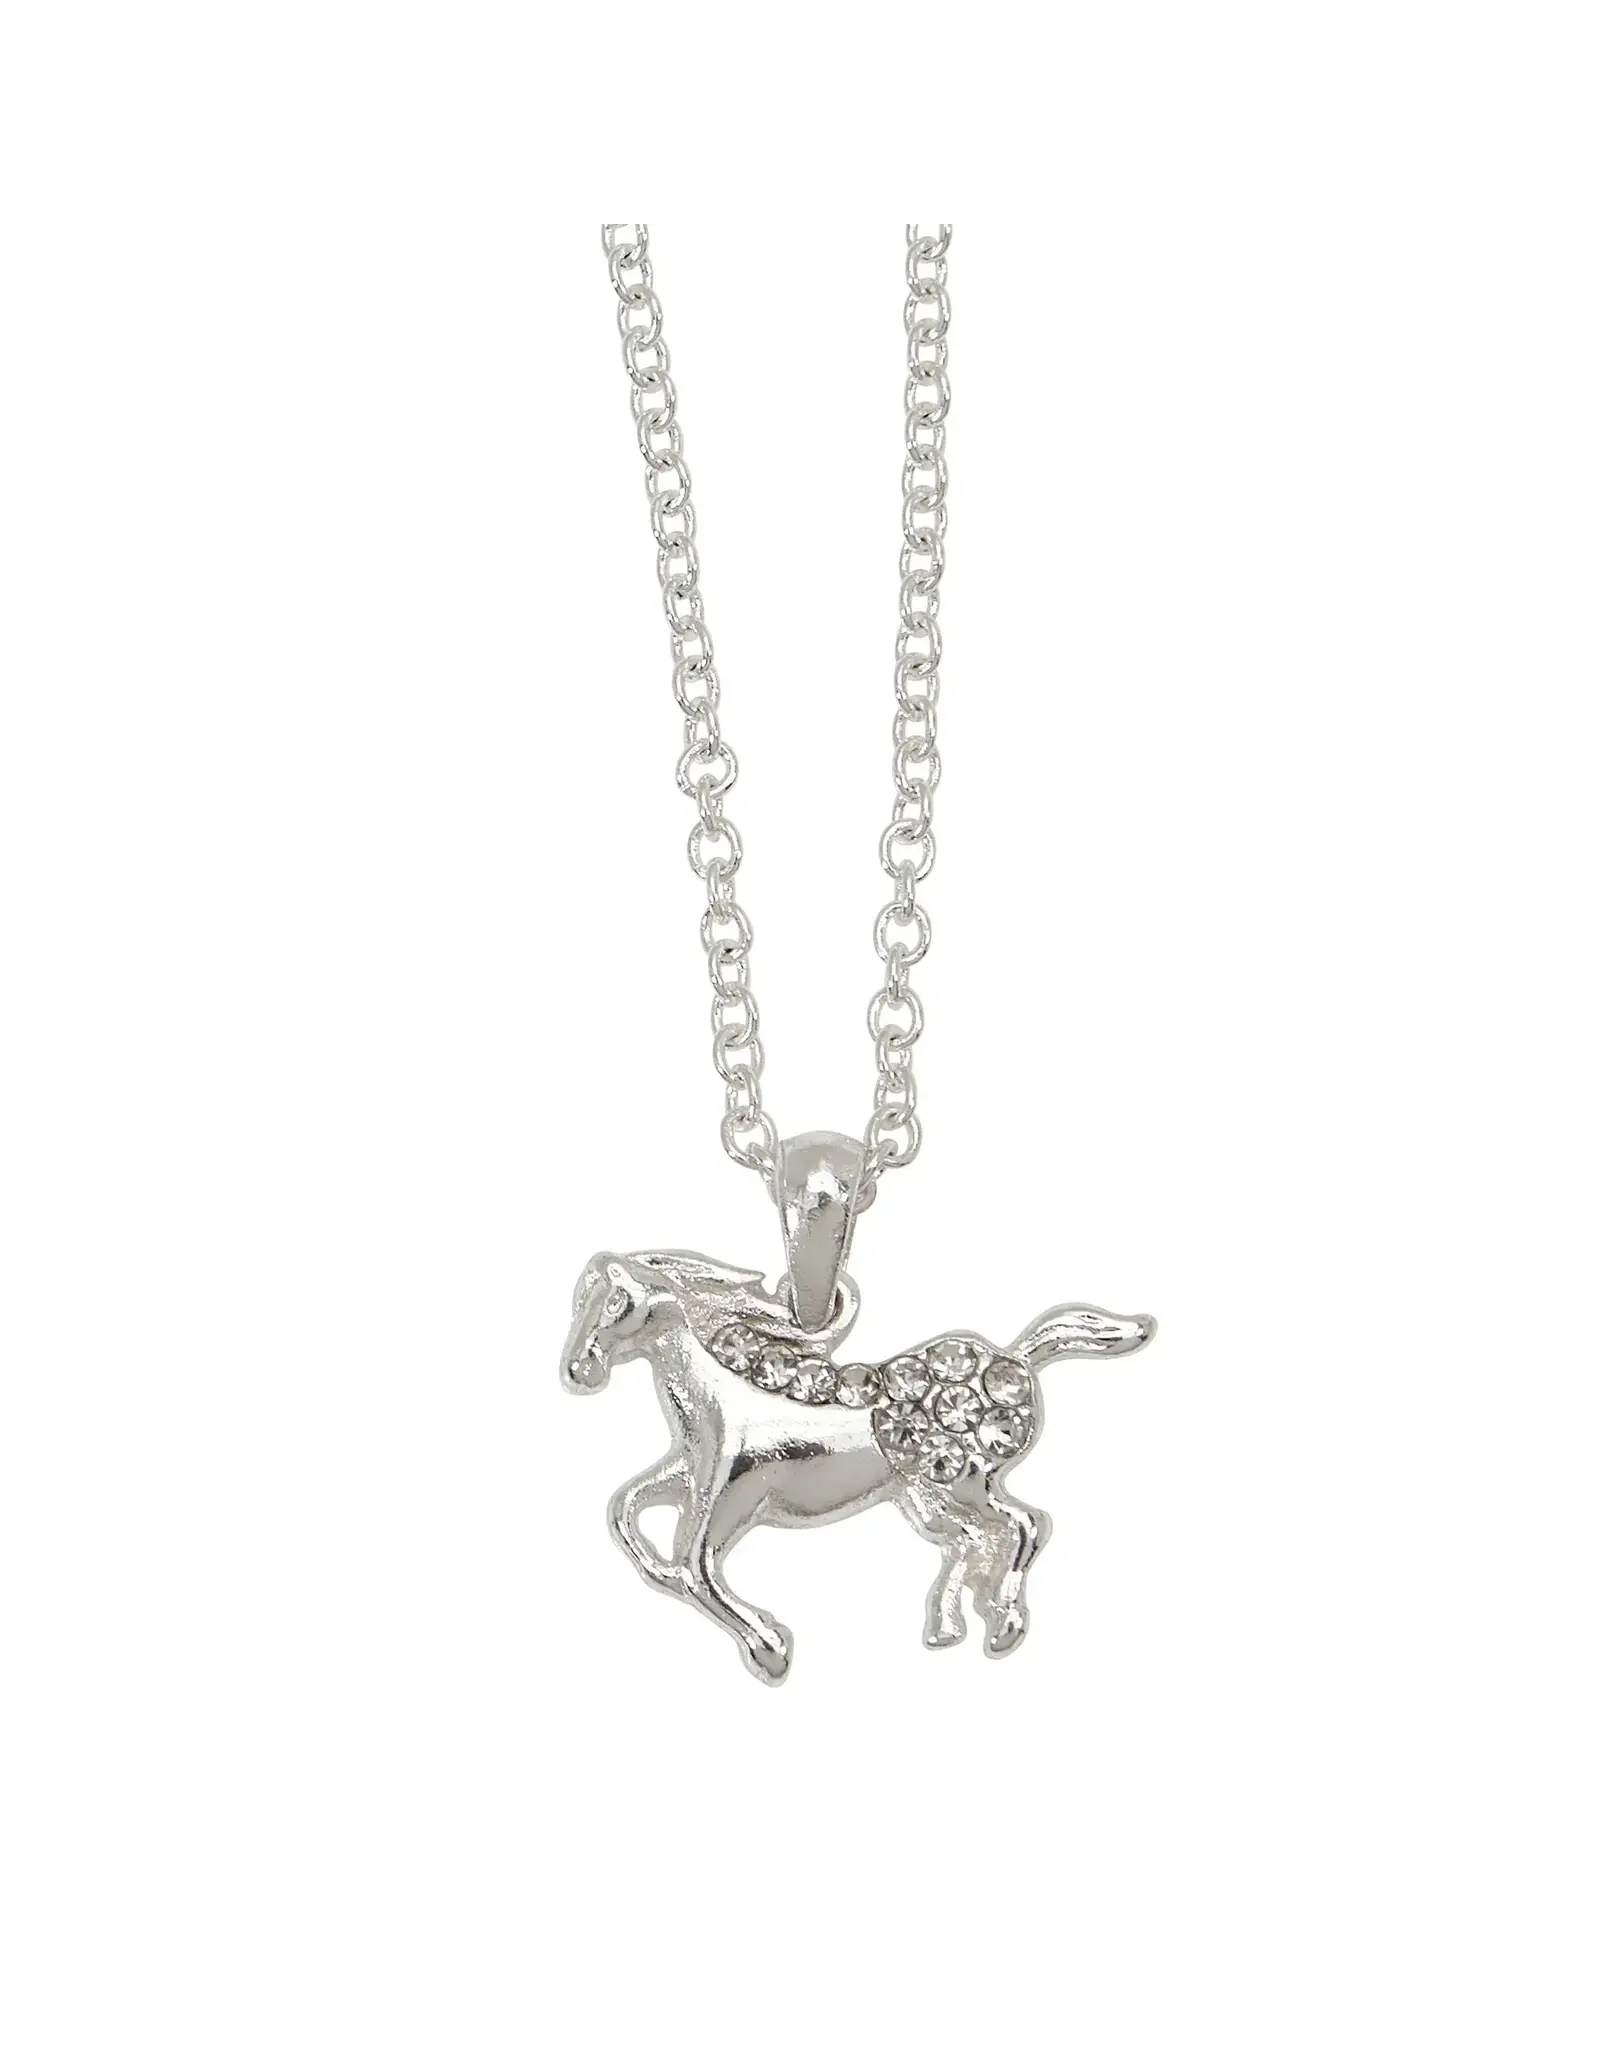 AWST International Galloping Horse Necklace w/Colorful Cowboy Hat Box